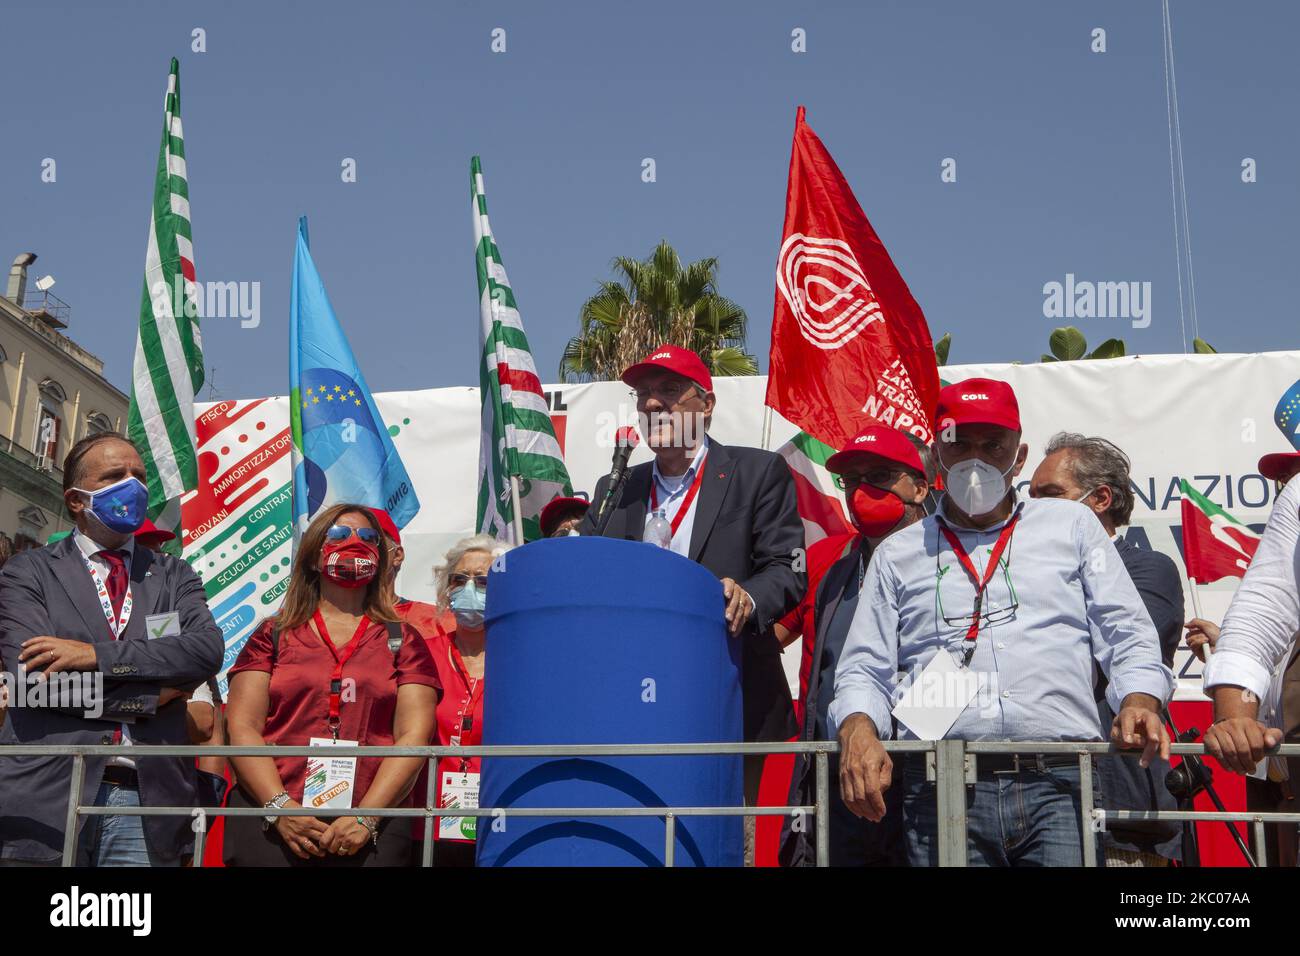 The secretary of the Cgil Maurizio Landini speaks during the demonstration of Trade Unions CGIL, CISL And UIL In Naples, Italy, on September 18, 2020. (Photo by Stephane Rouppert/NurPhoto) Stock Photo